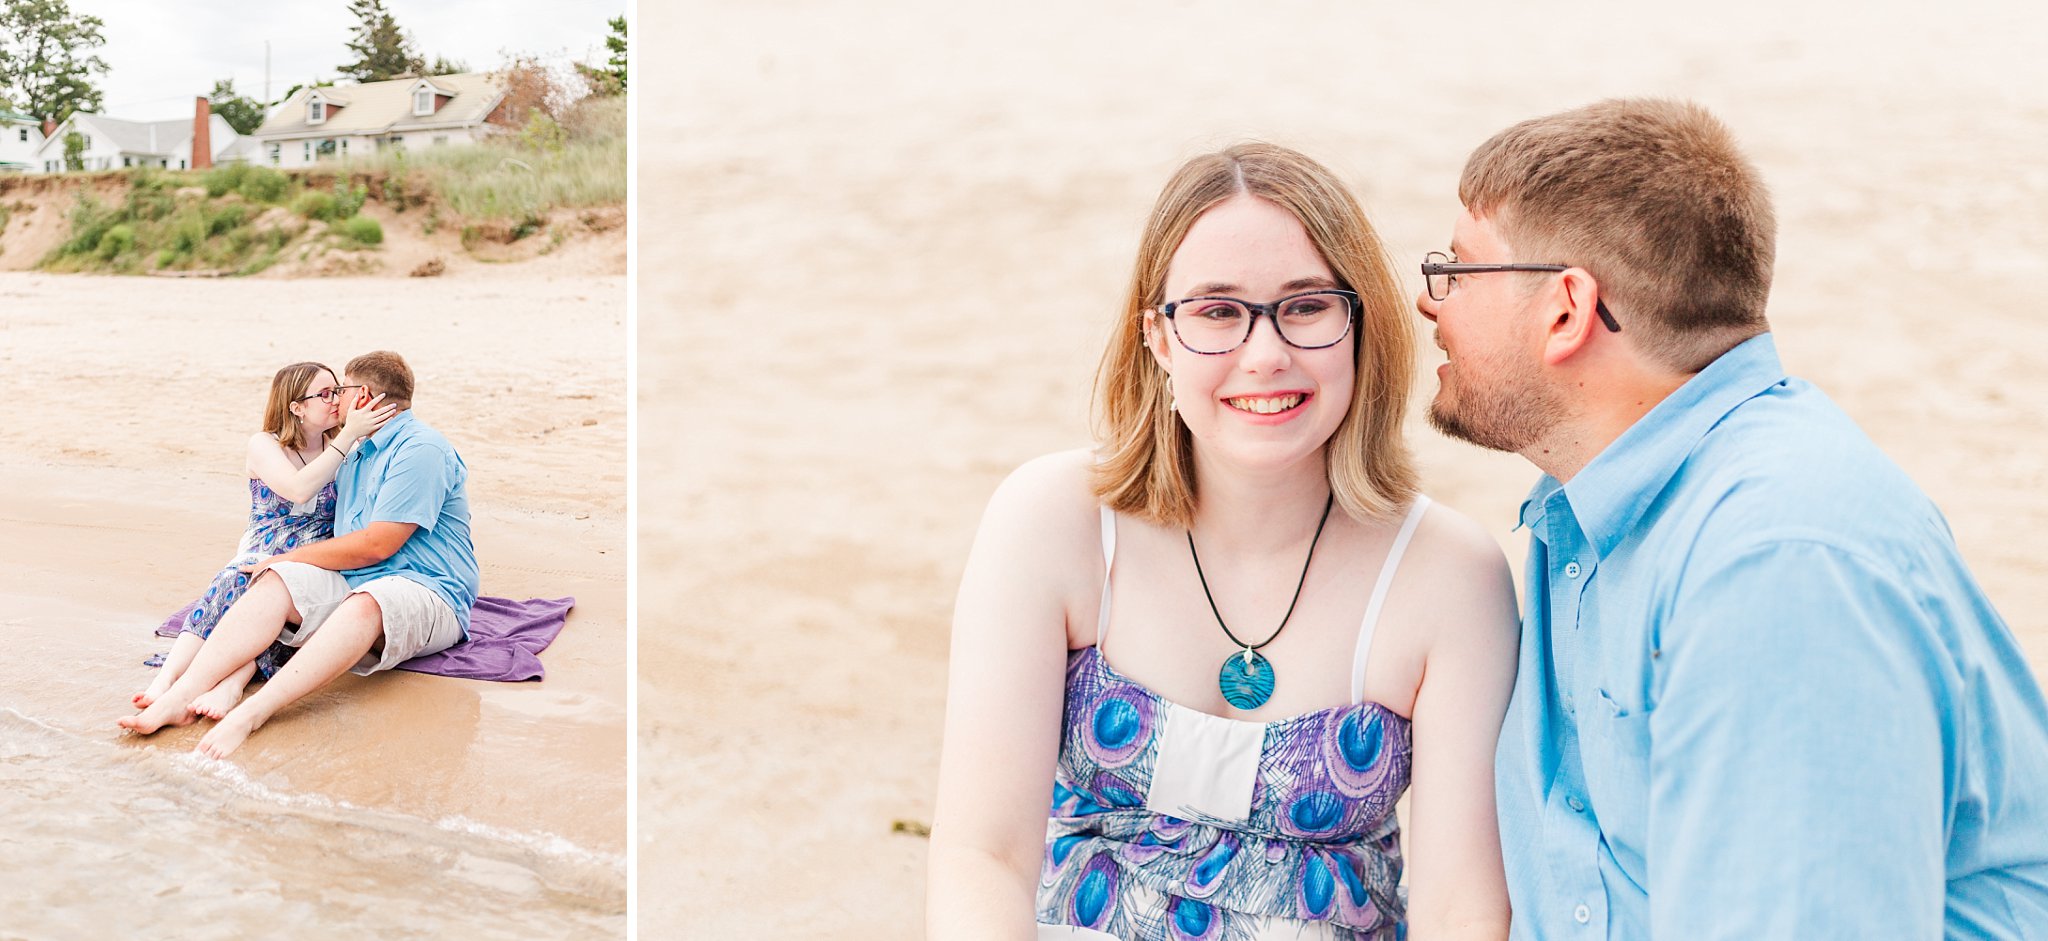 a couple sits together and leans in for a kiss on the beach